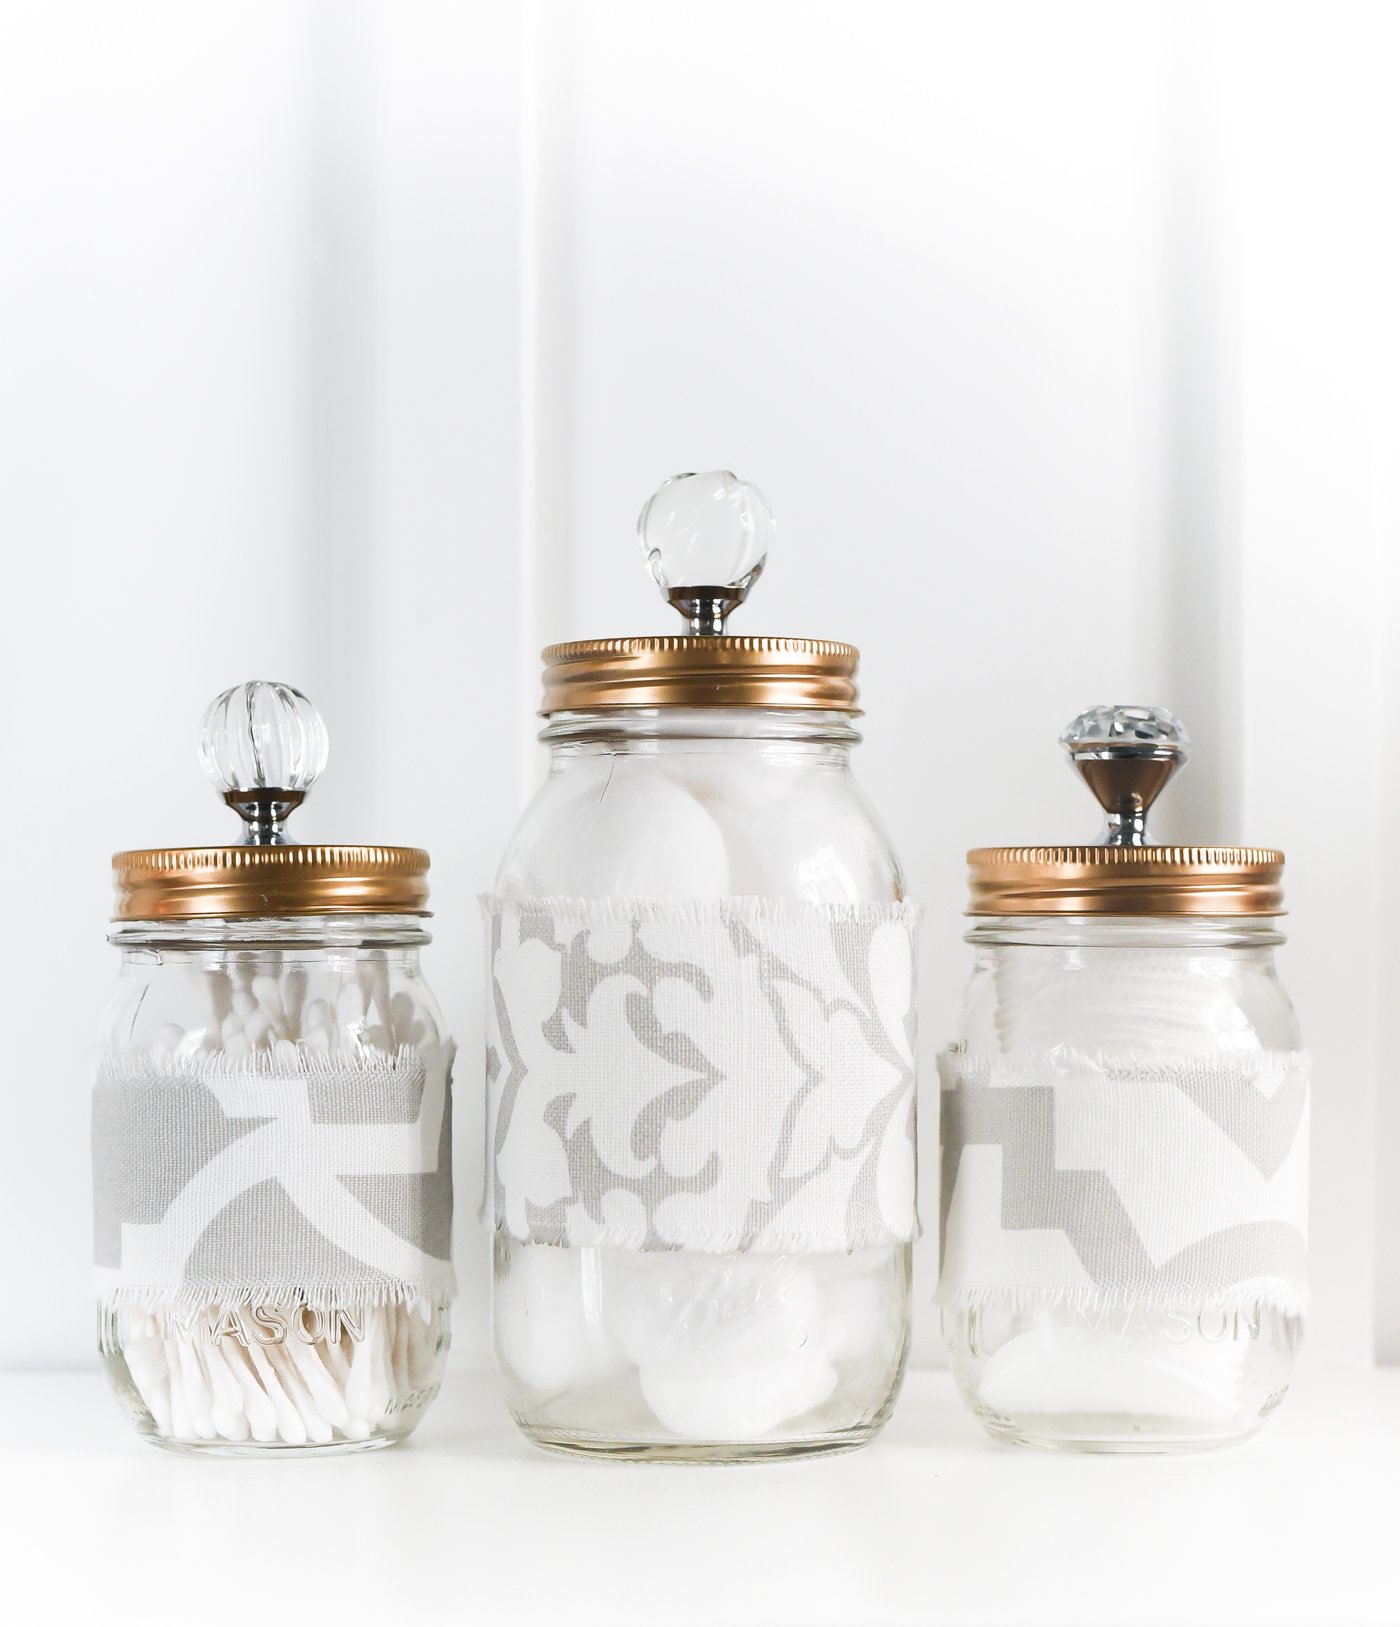 Mason jars with knobs attached to tops. Gold spray painted mason jar lids with knobs. Fabric covered mason jars. Fabric mason jar cozies. Gray and white mason jars with gold spray painted lids.